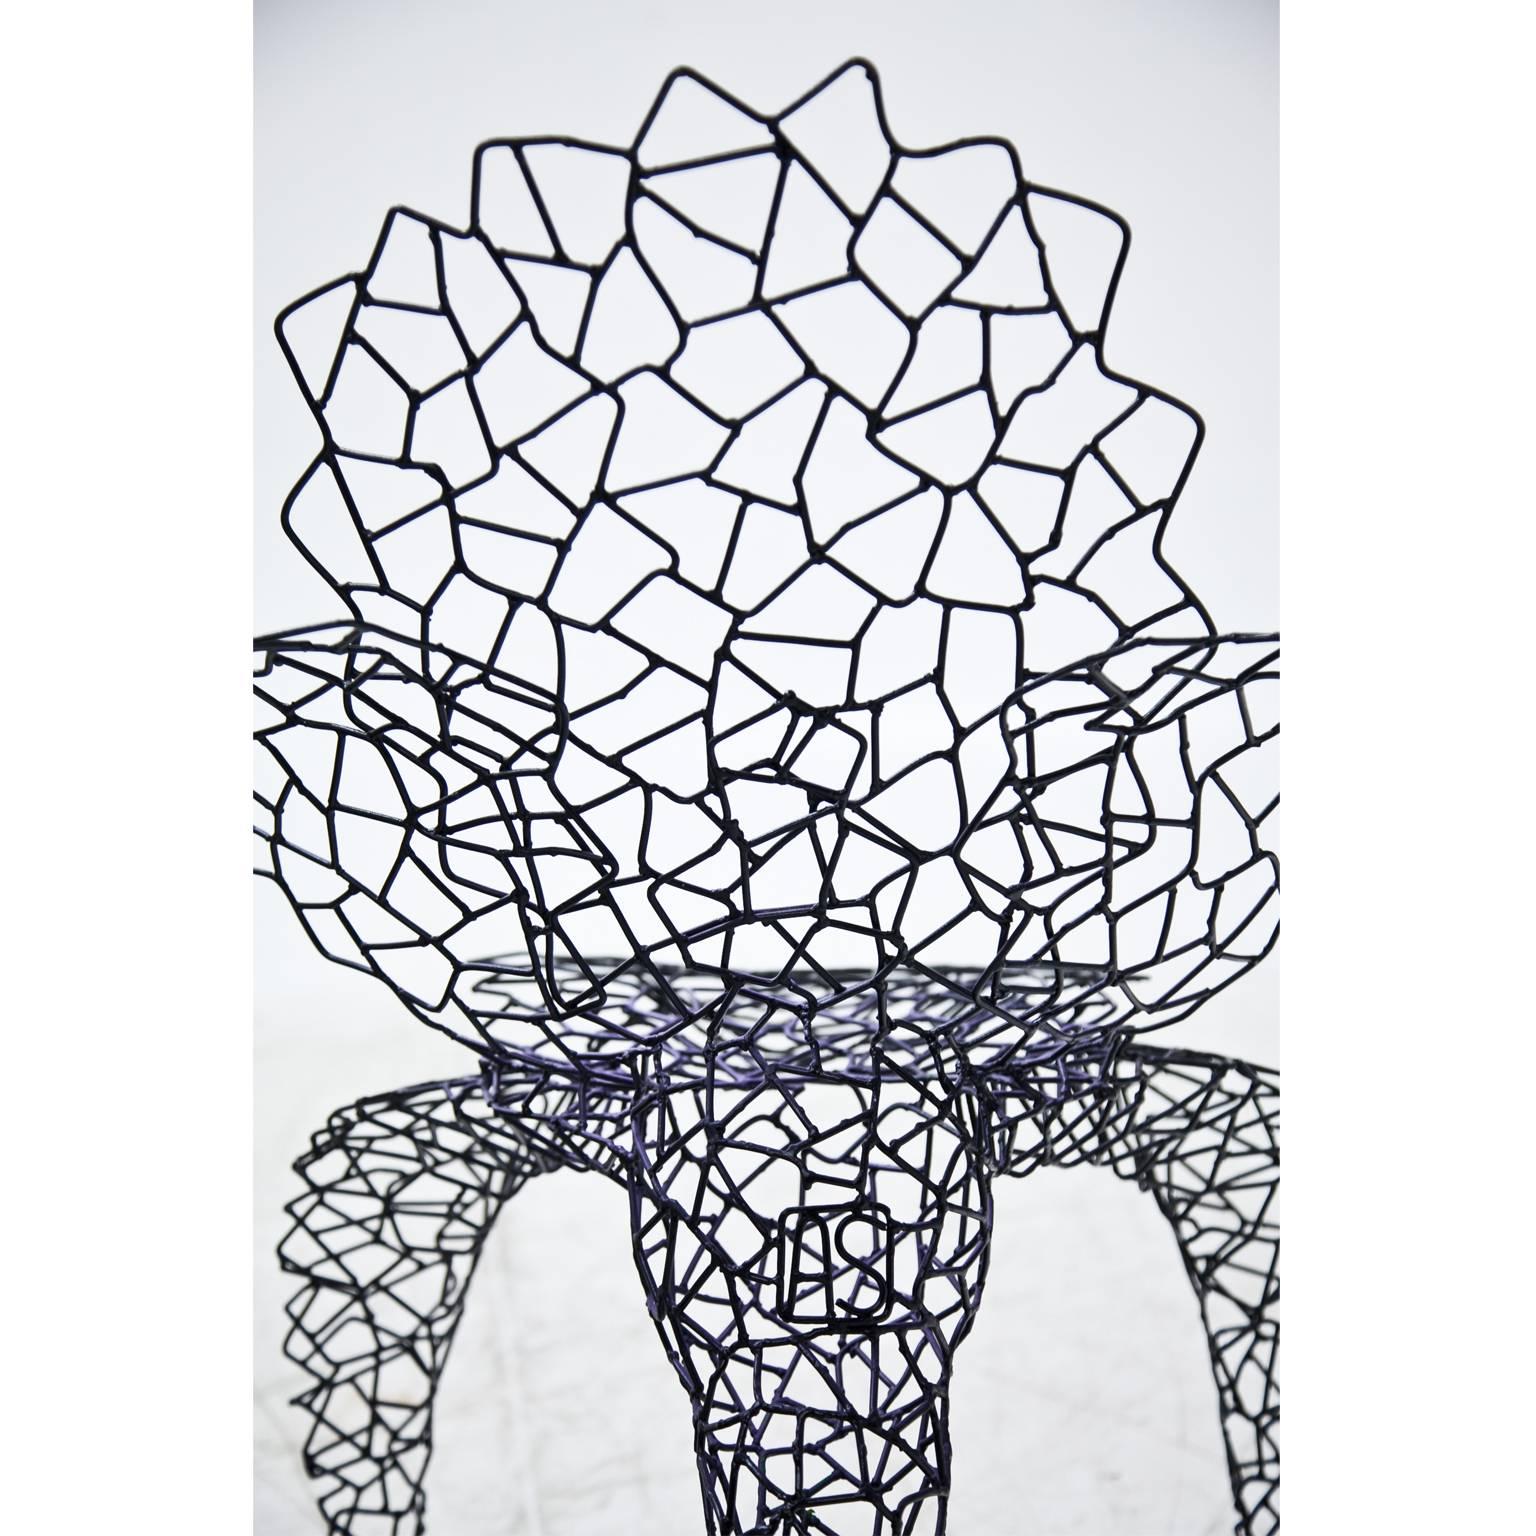 Contemporary Seating Sculpture by Anacleto Spazzapan, 21st Century